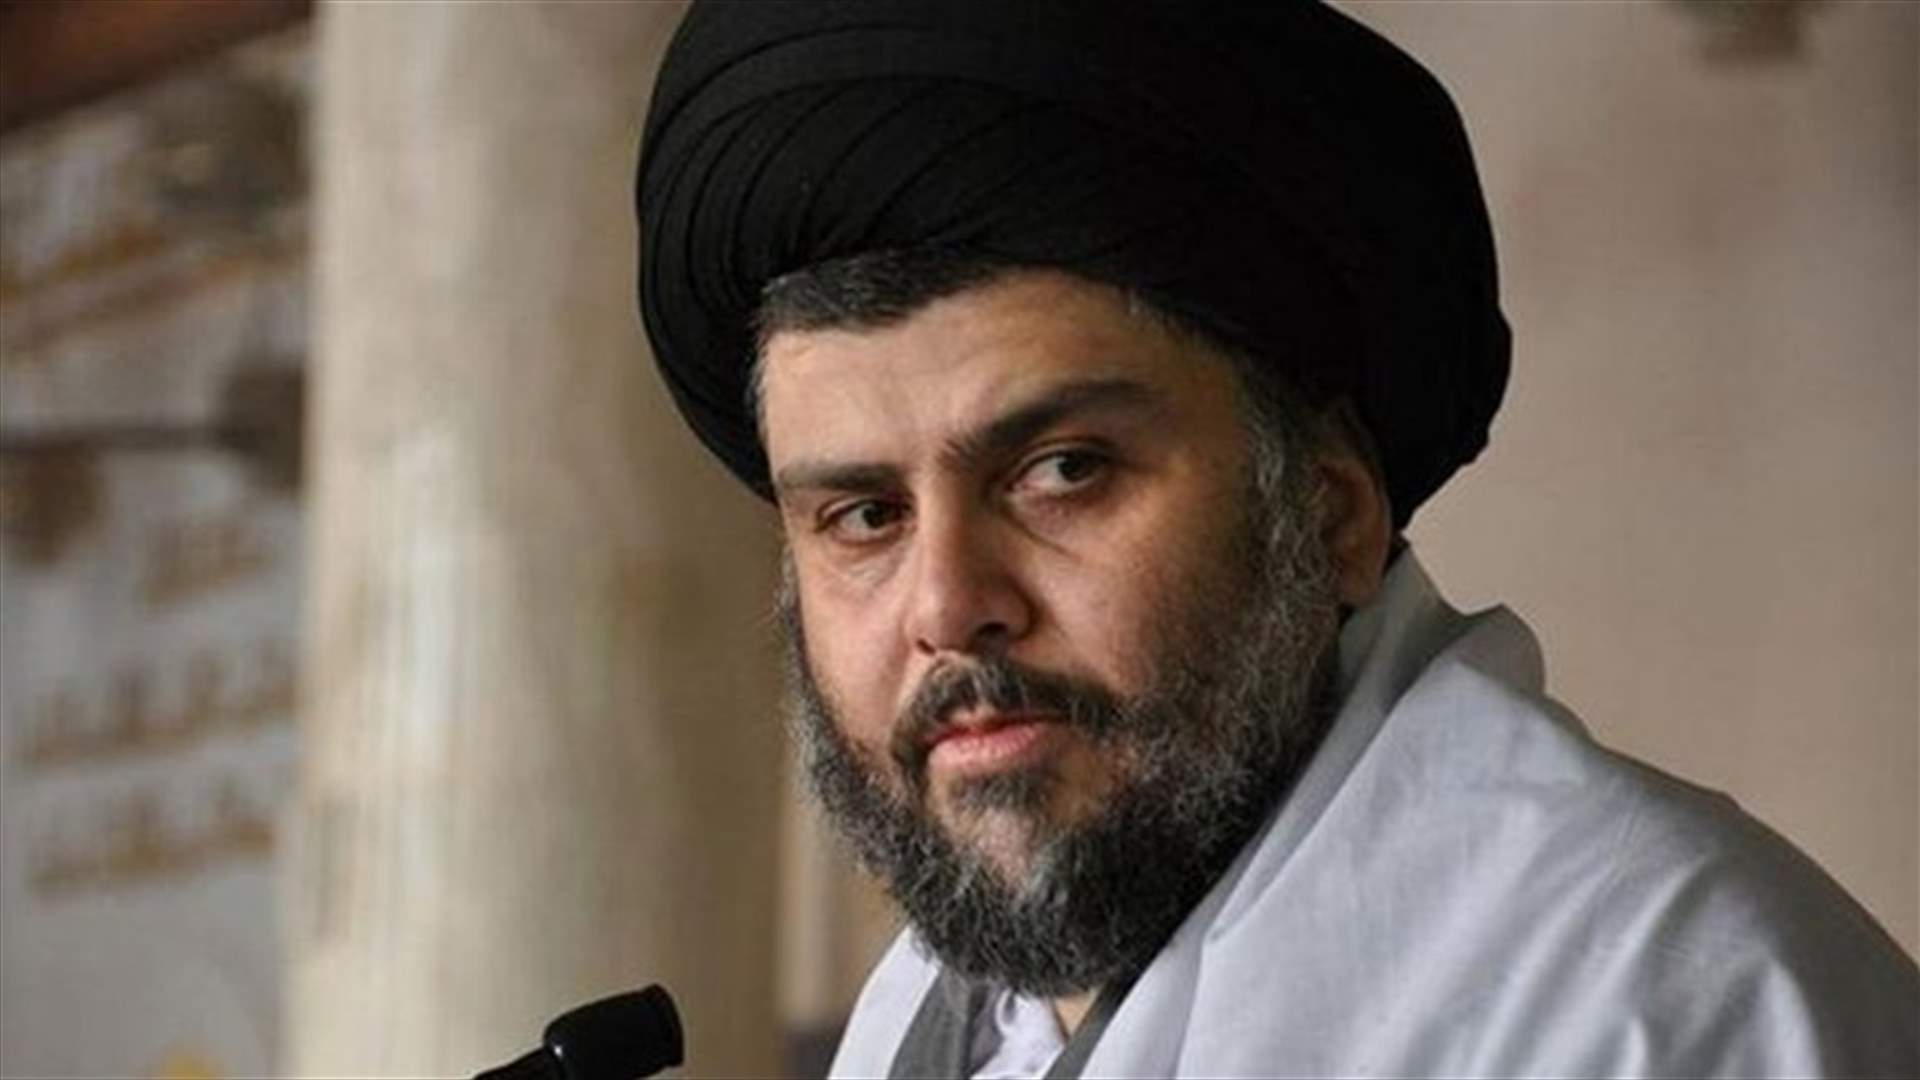 Cleric Sadr backs Iraq protests, calls for delay in government formation